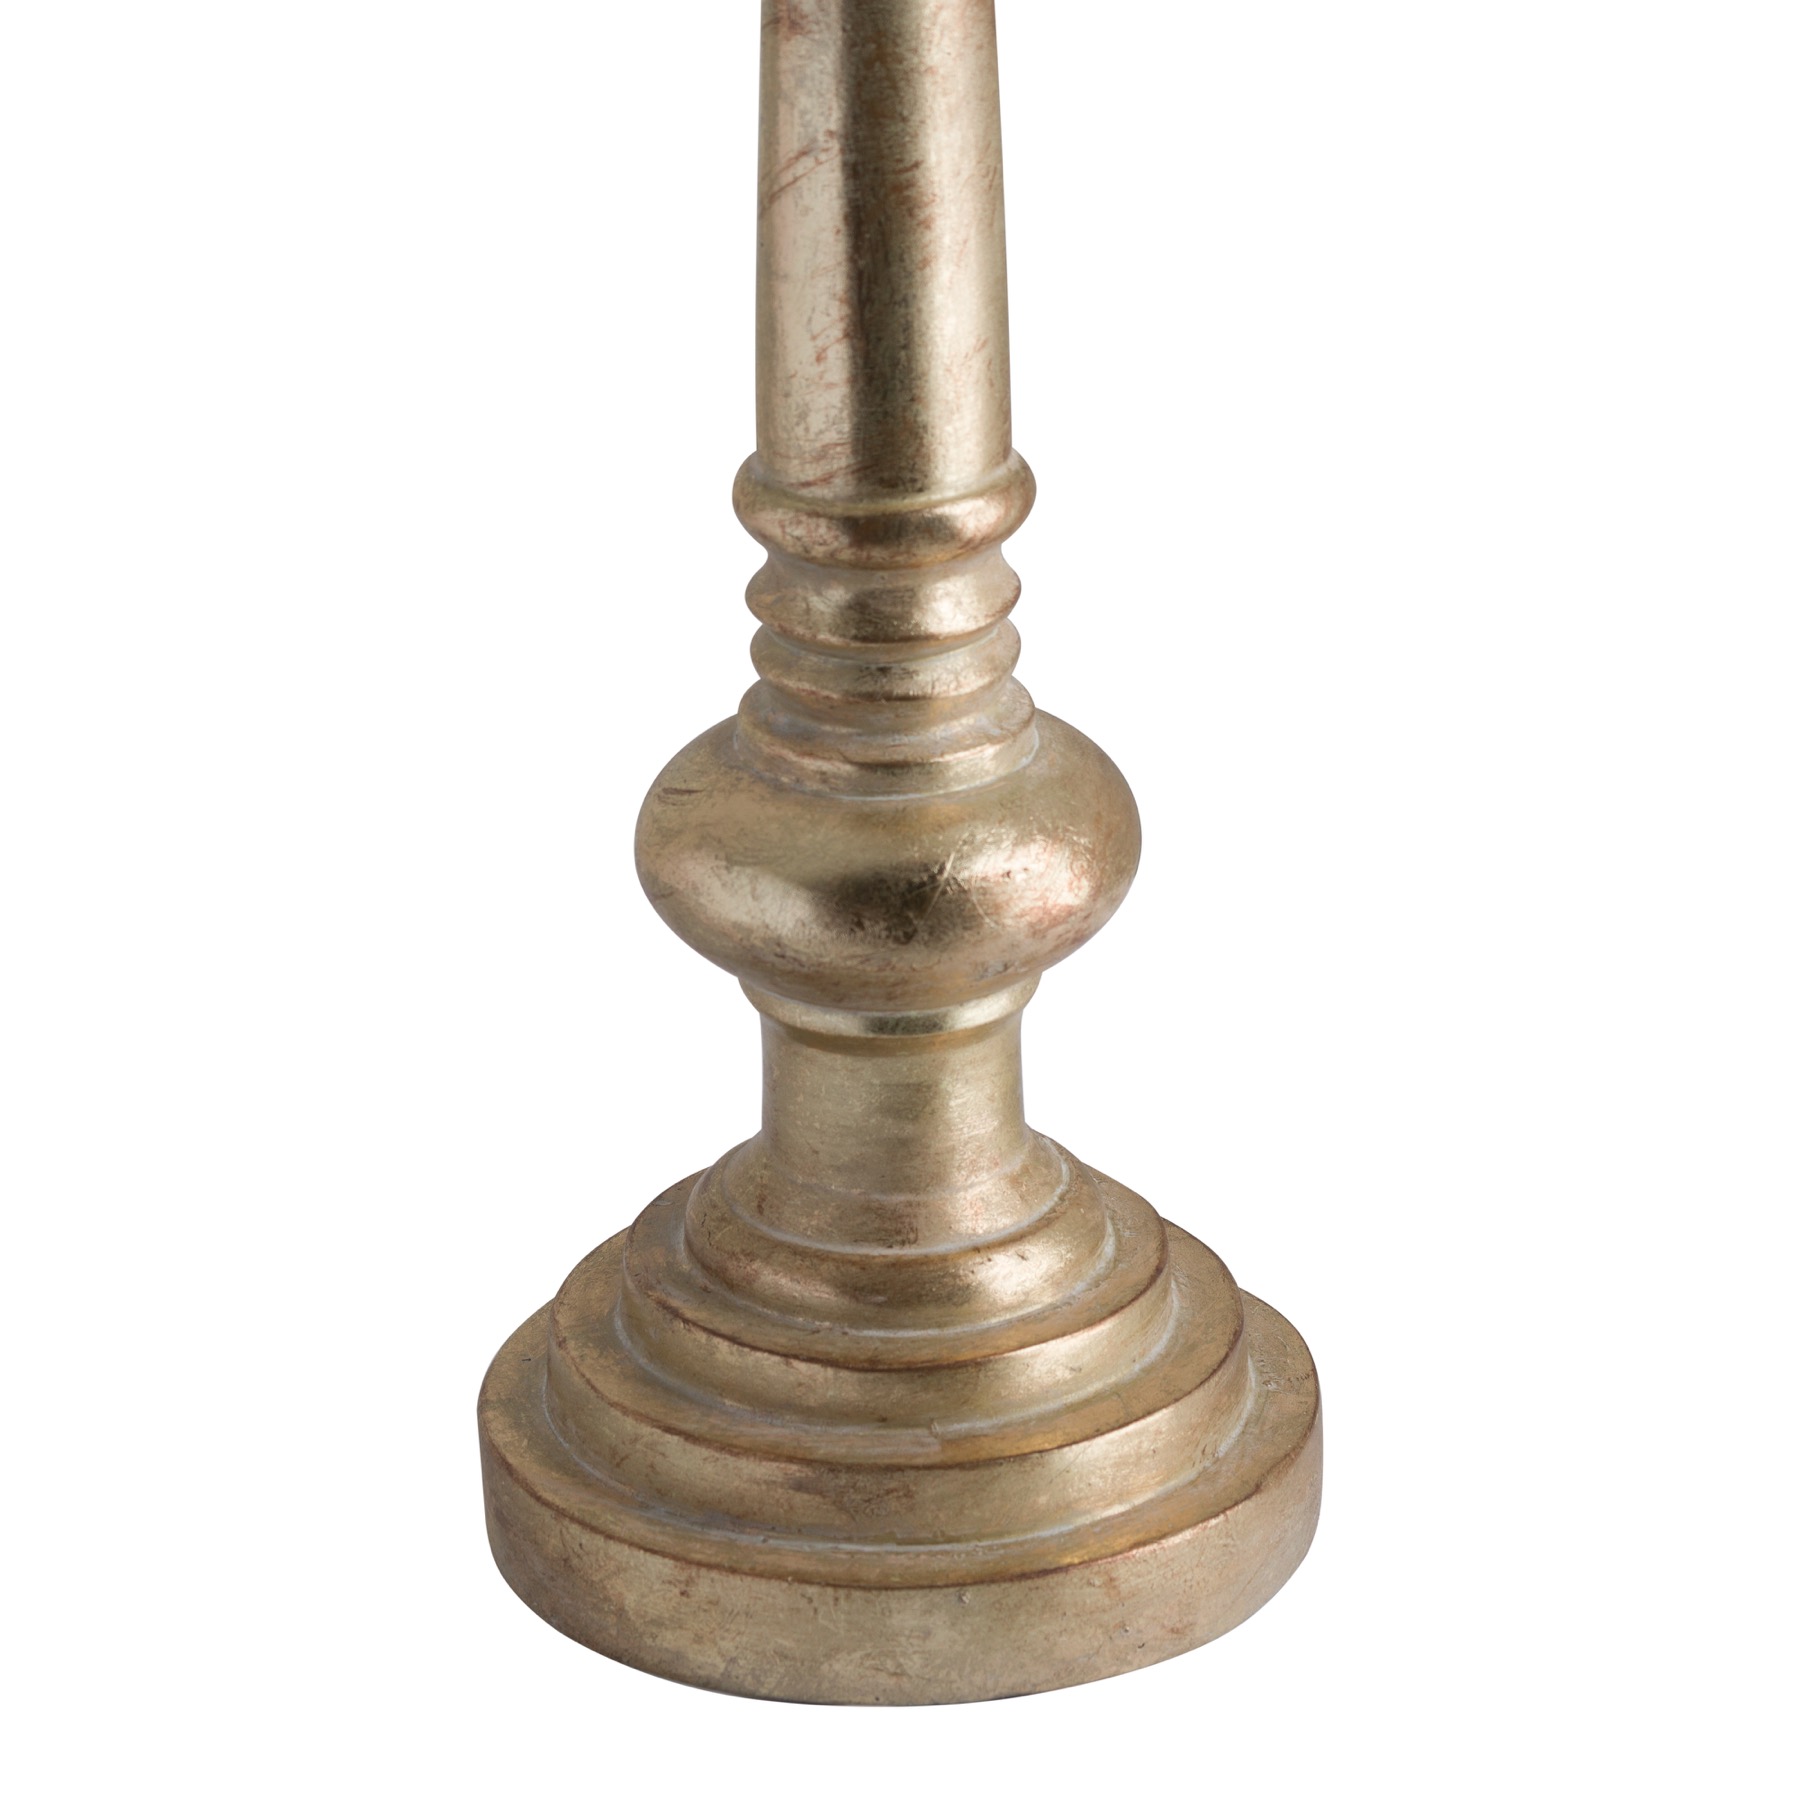 Antique Brass Effect Candle Holder - Image 2